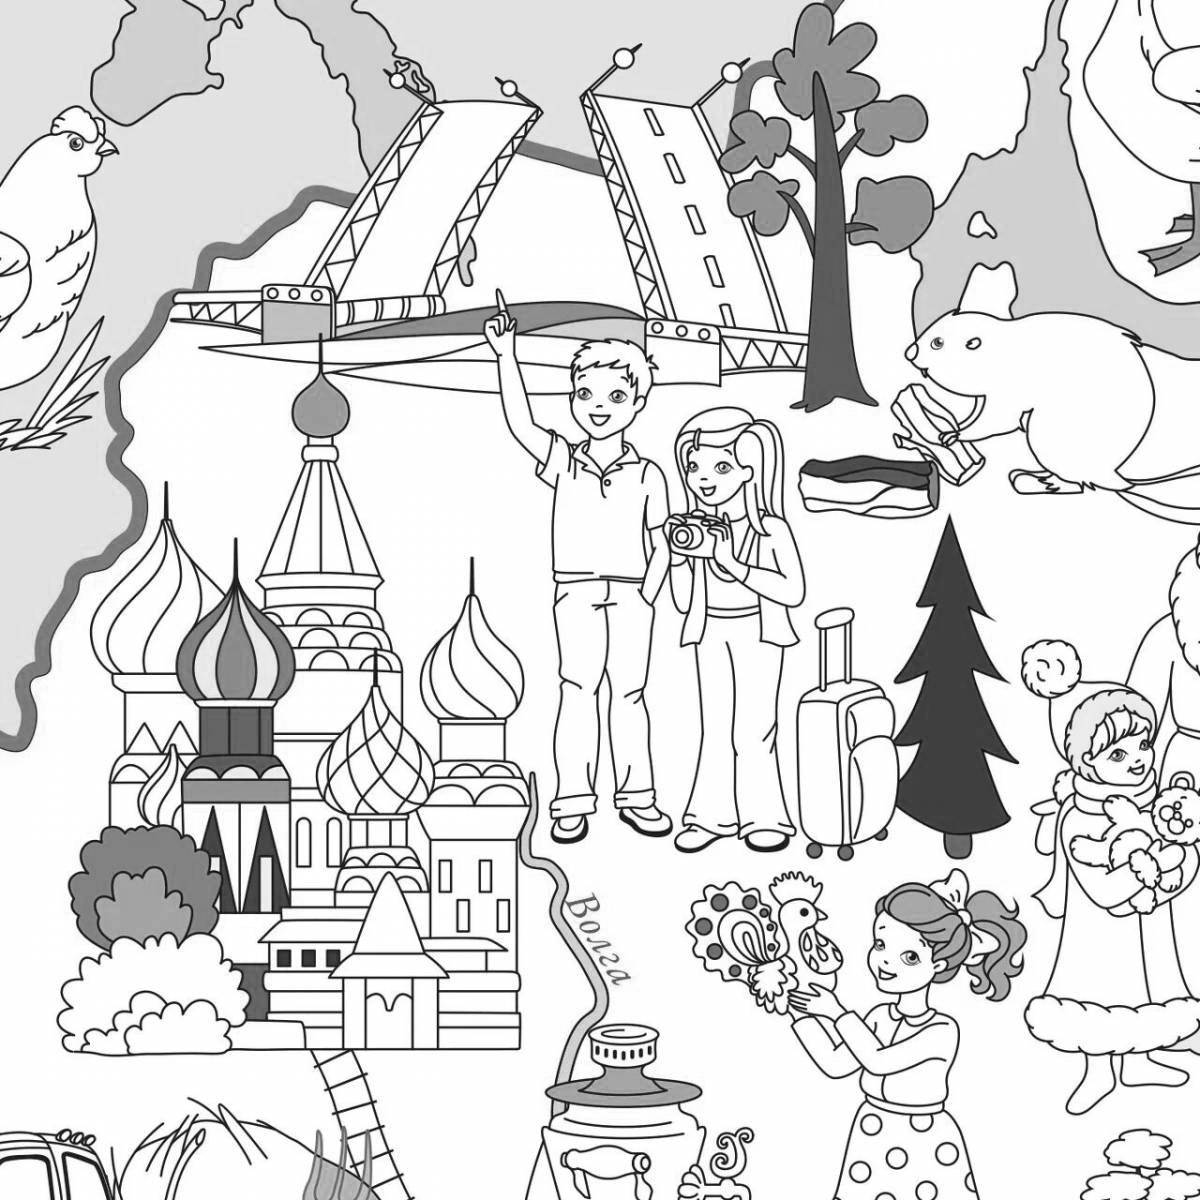 Colorific Russia my homeland coloring book for children 6-7 years old